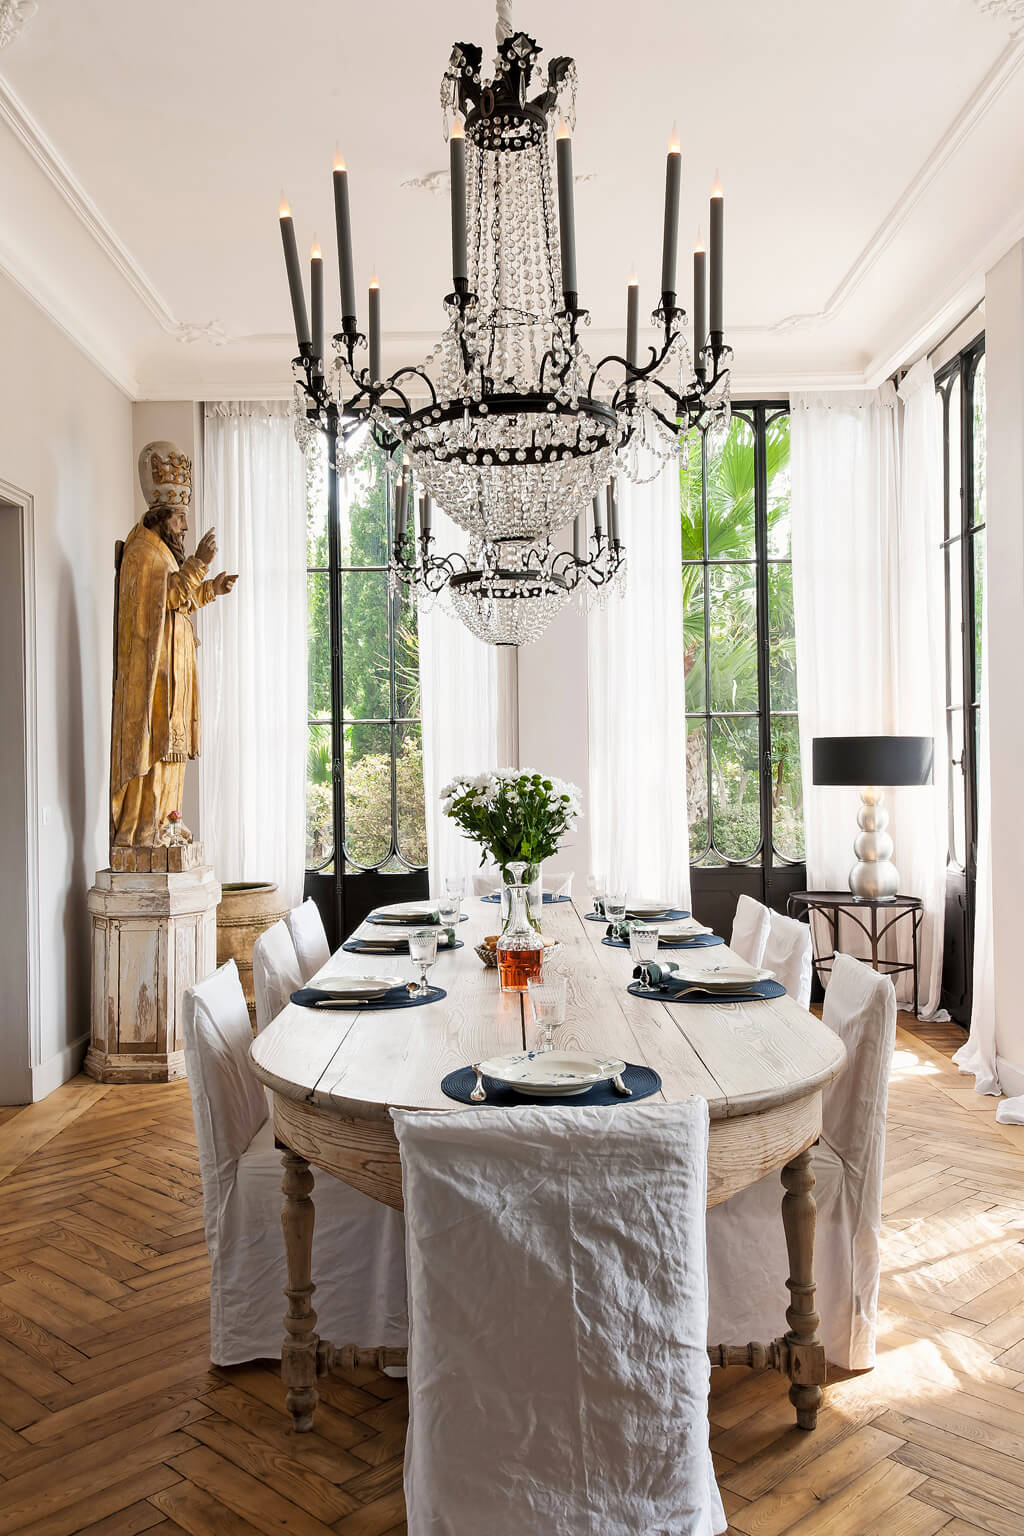 Ethereal and rustic Avignon dining room with Empire chandeliers. Come see a Breathtaking French Château Tour in Provence With Photo Gallery of Historical Architecture, Dramatic Eclectic Interiors & Oddities!